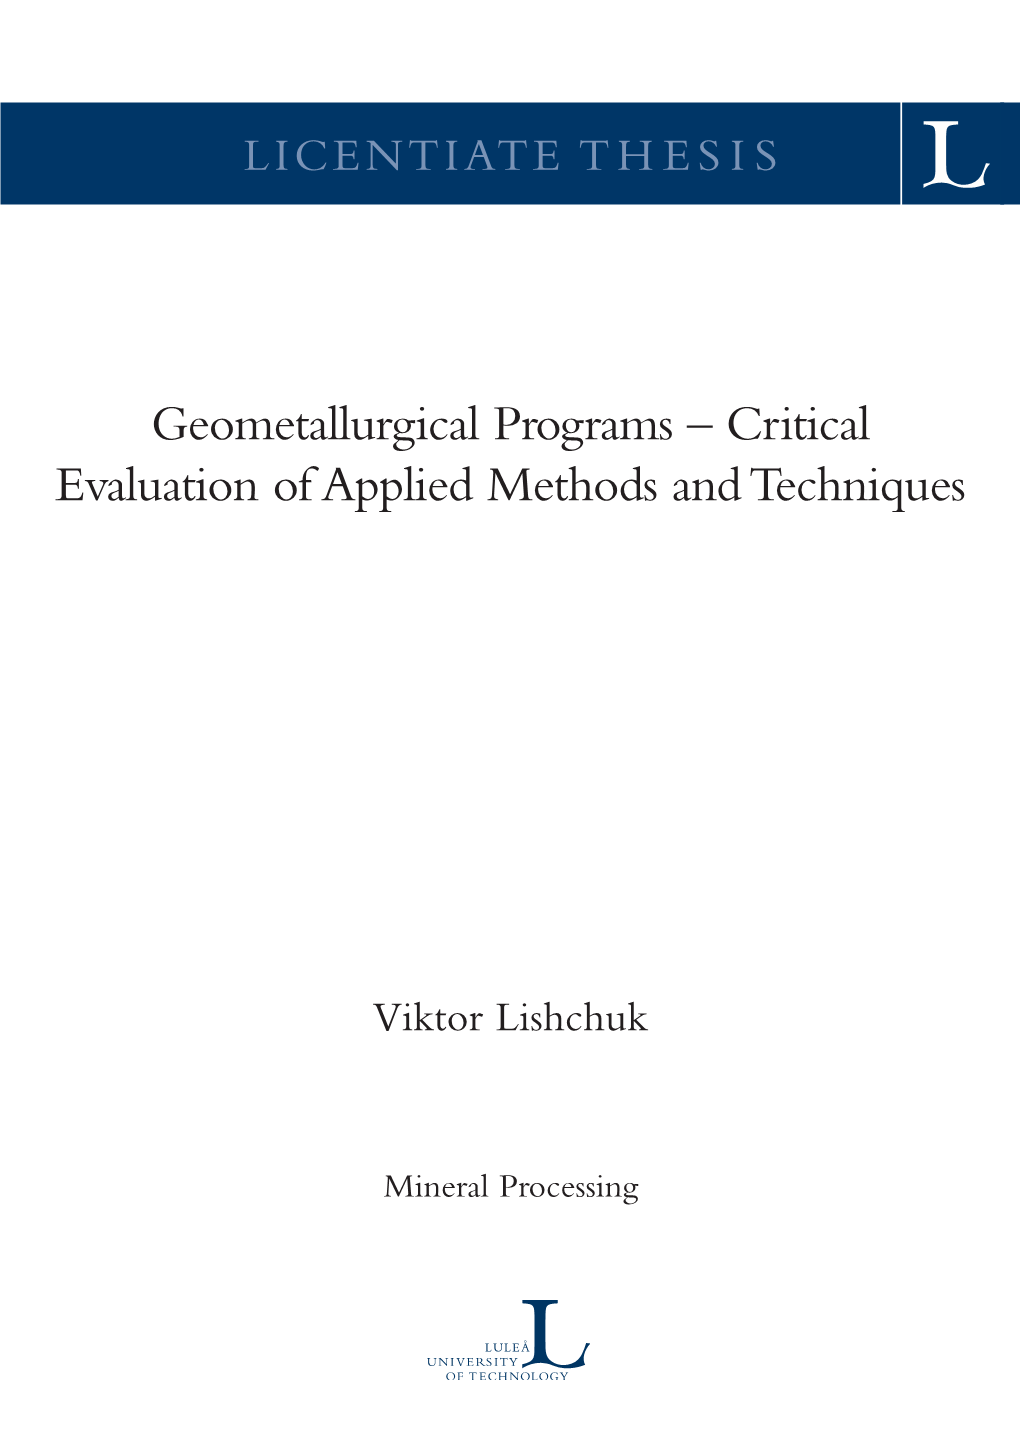 Geometallurgical Programs – Critical Evaluation Programs of – Critical Viktor Lishchuk Geometallurgical Applied Methods and Techniques